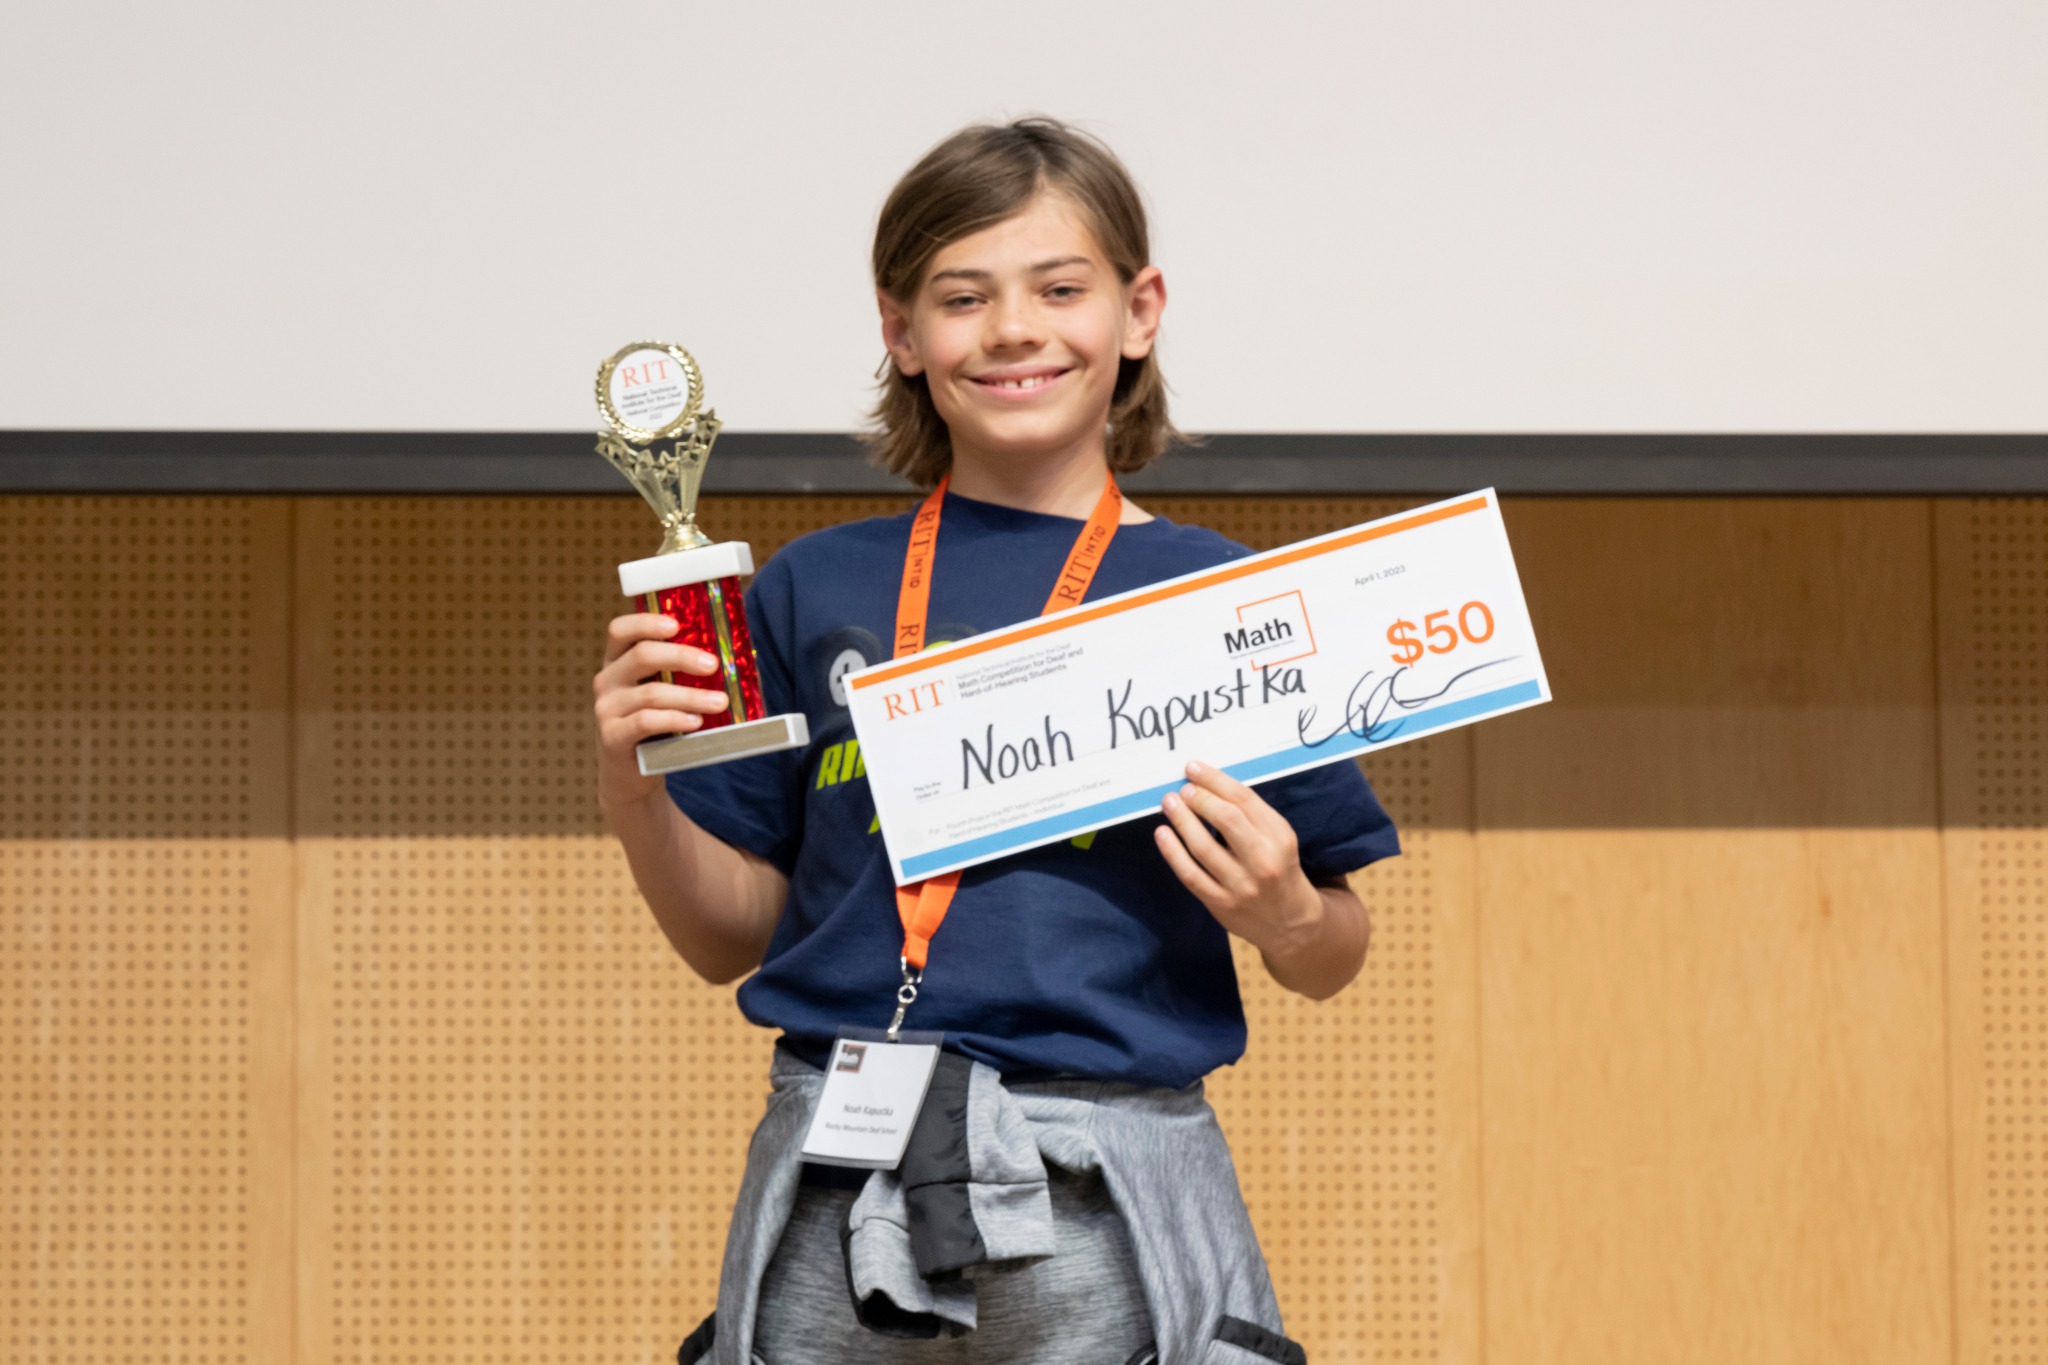 A middle school contestant from Rocky Mountain Deaf School stands facing the camera, holding a trophy and a check for $50. The contestant is wearing a blue shirt with an orange name tag.